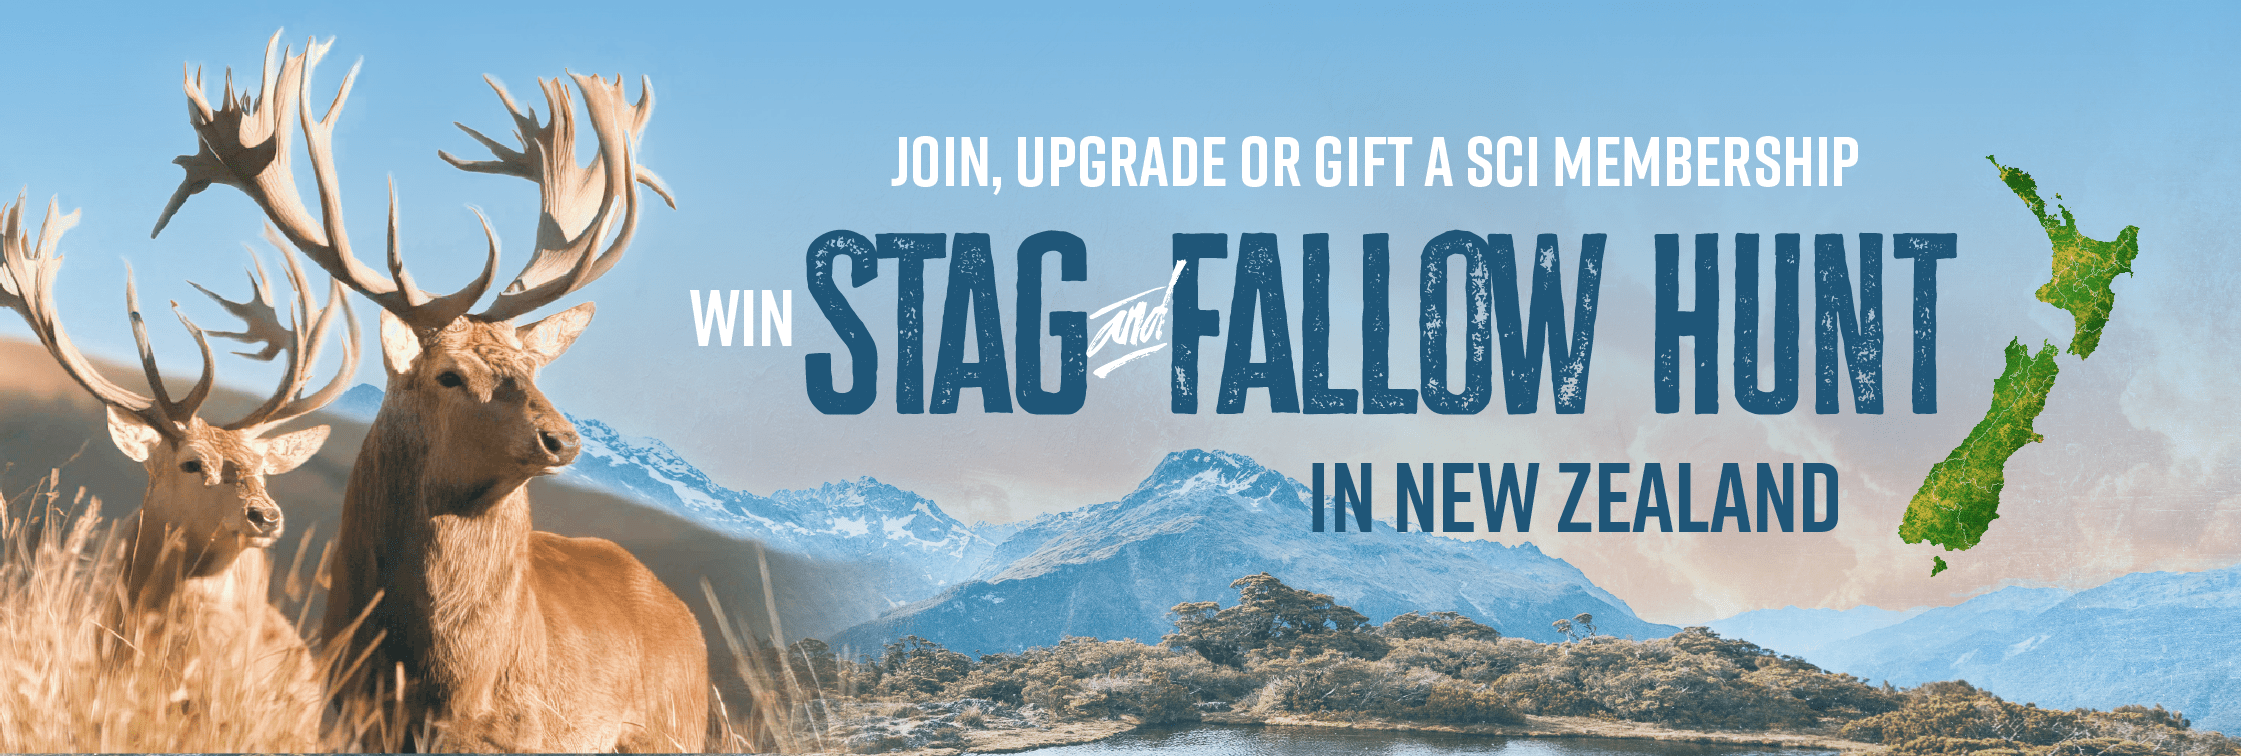 Join, Upgrade, or gift a SCI Membership for a change to win a Stag and Fallow Hunt in New Zealand with Chris Dorsey!